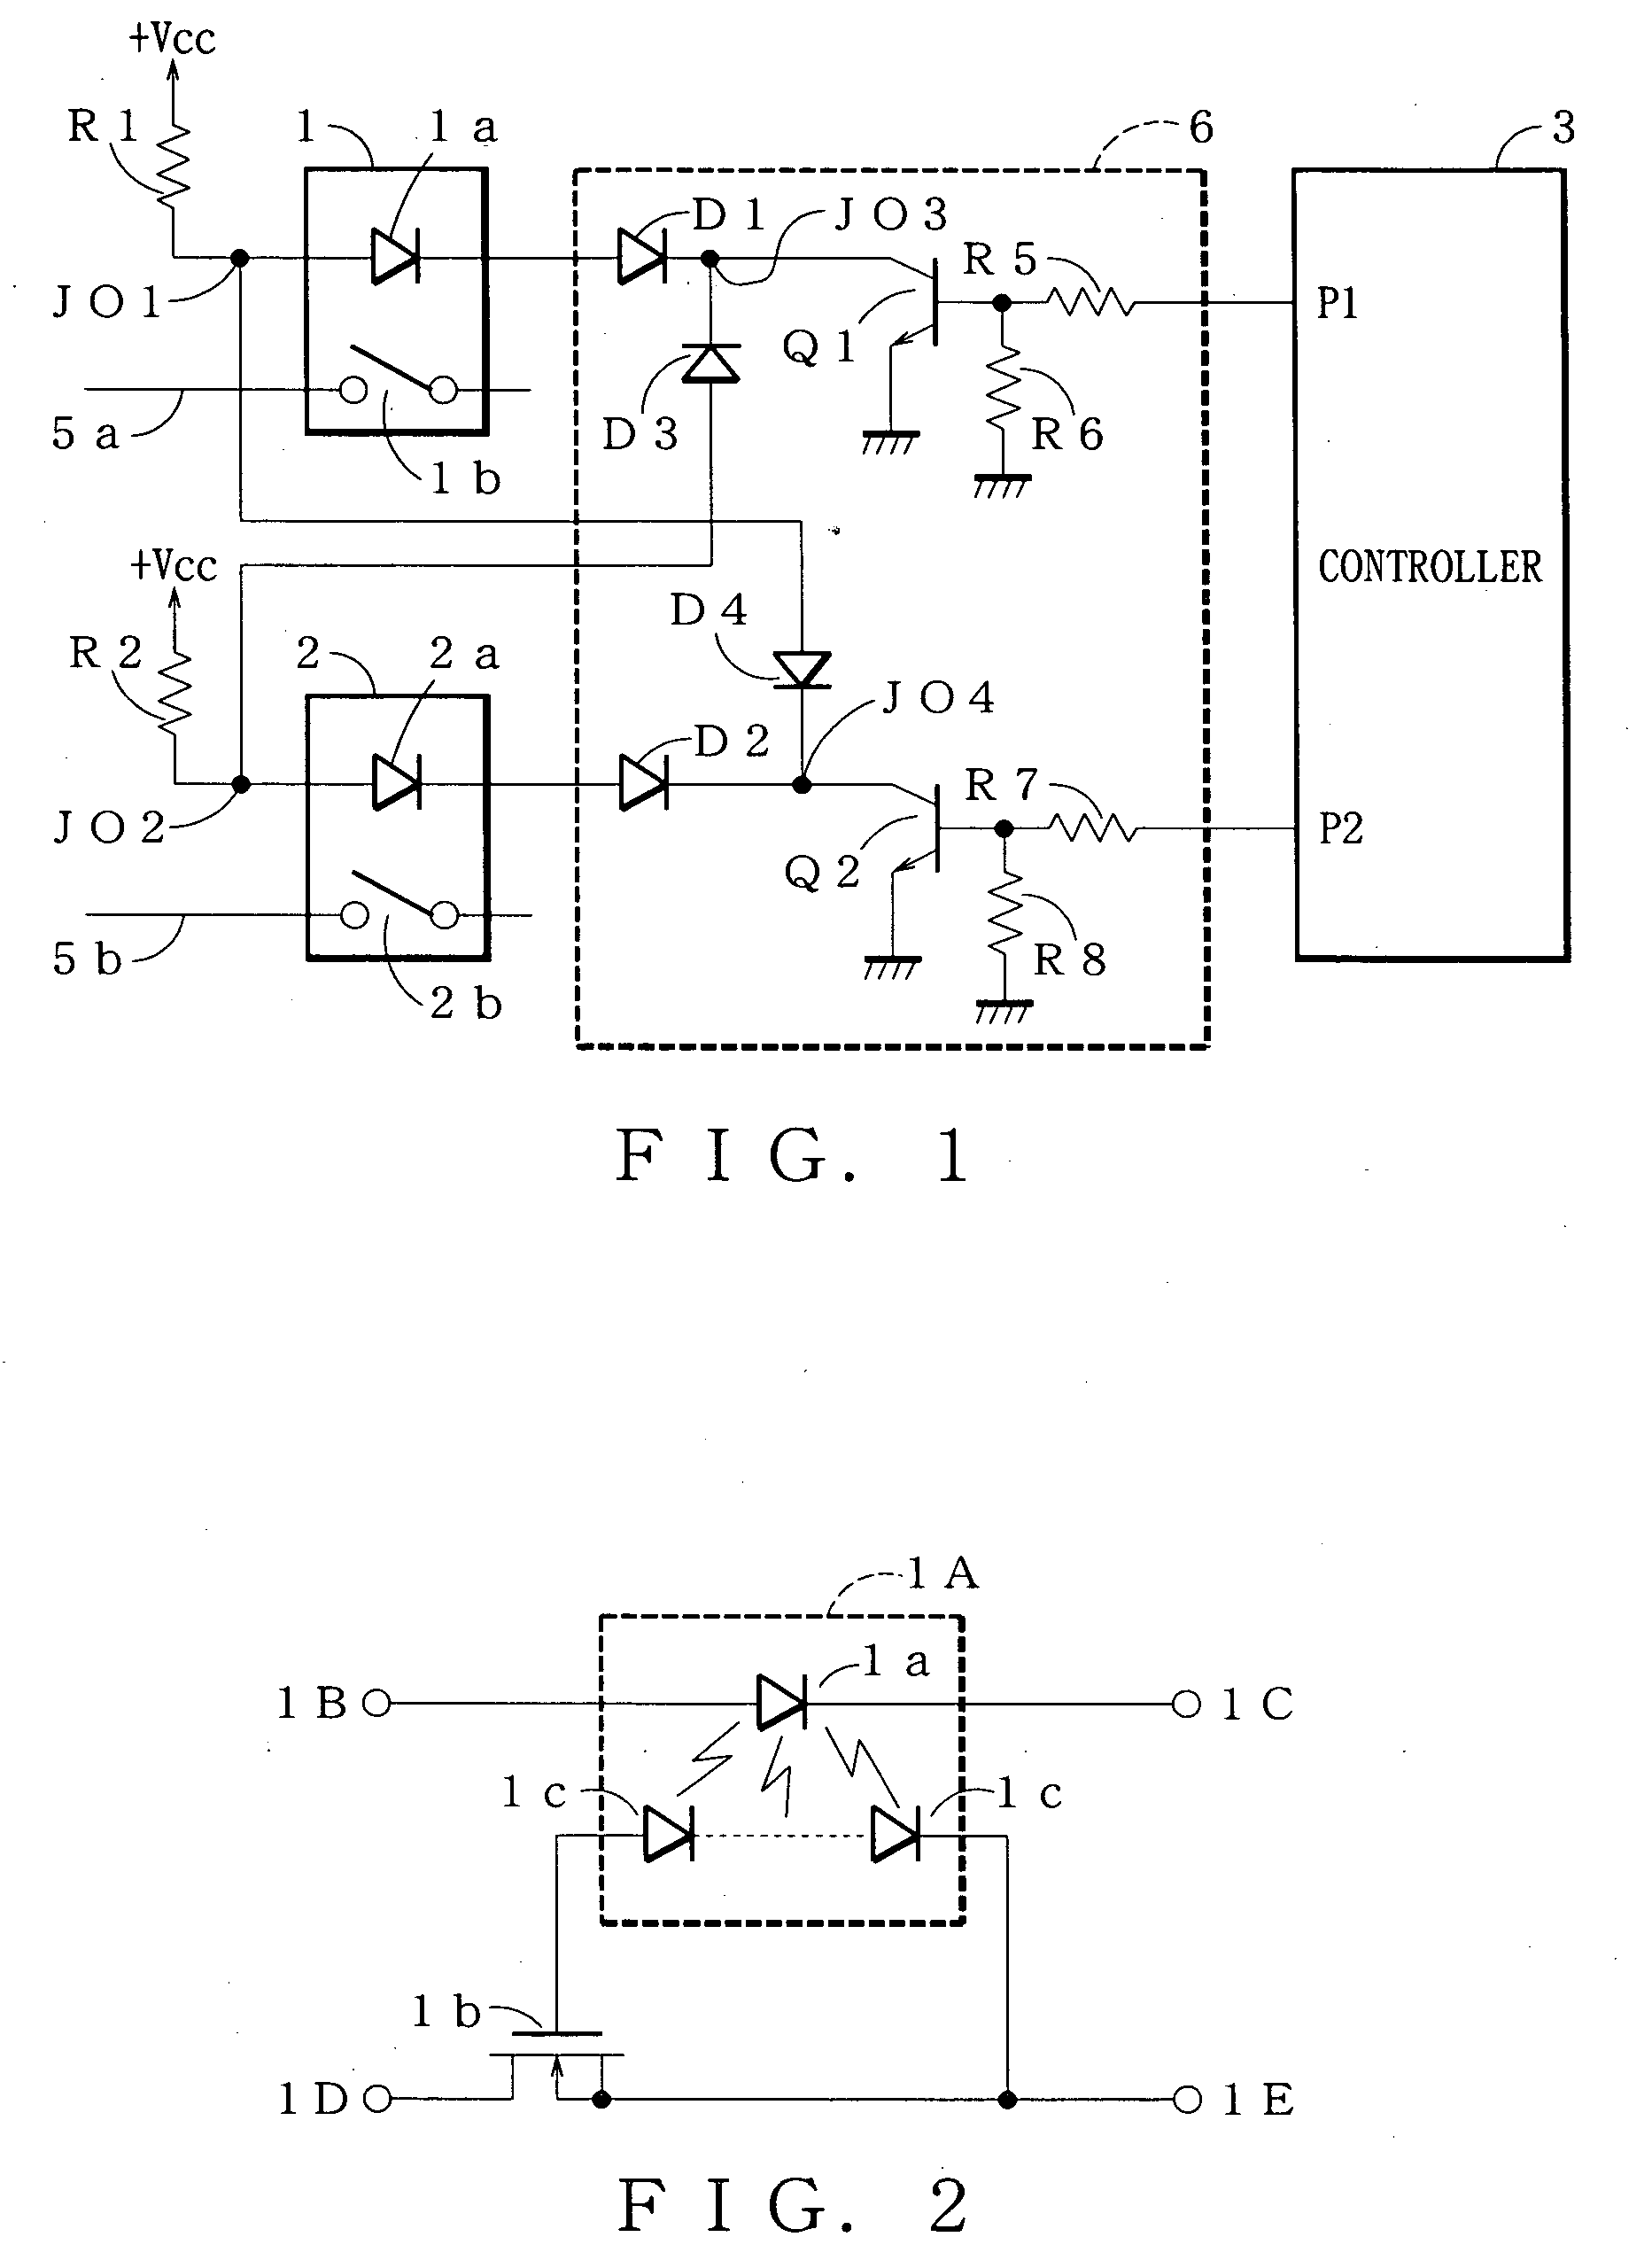 Circuit for preventing simultaneous on operations